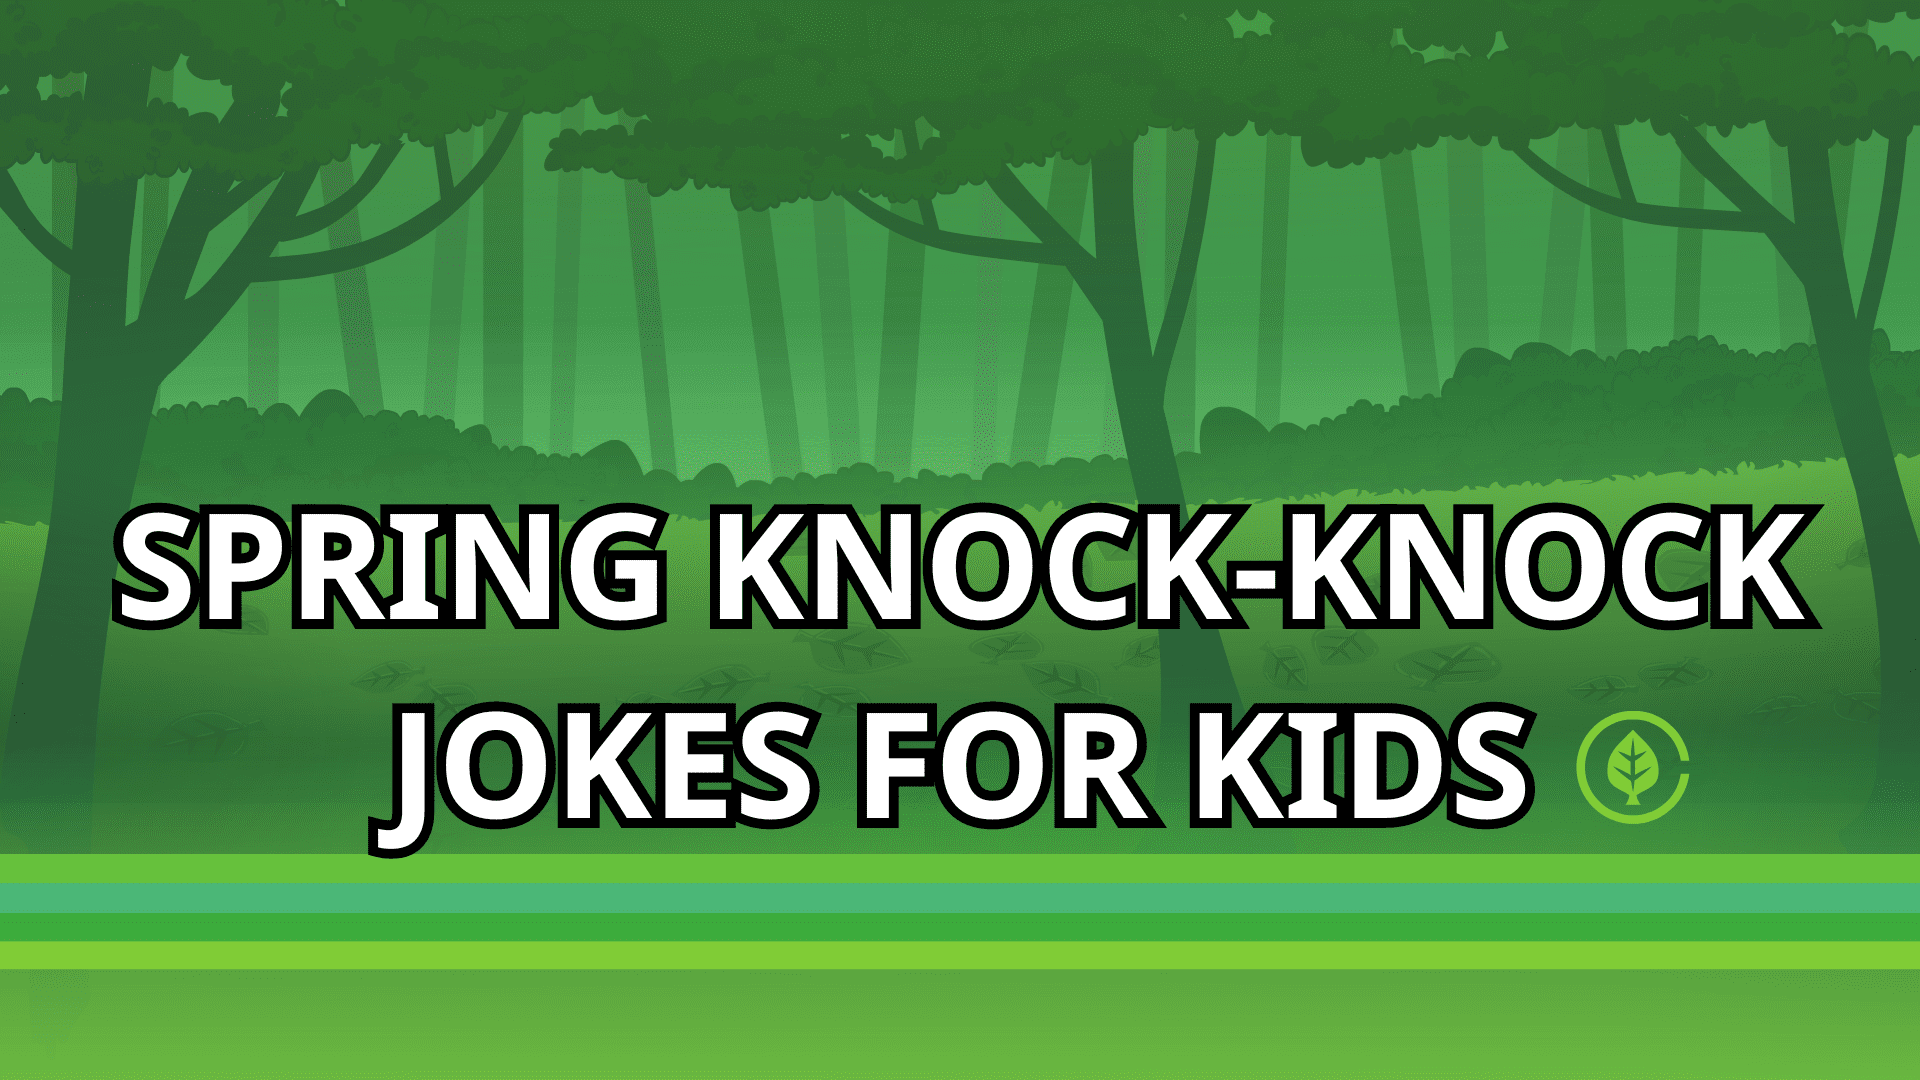 A green forested background with the text "Spring Knock-Knock Jokes for Kids".